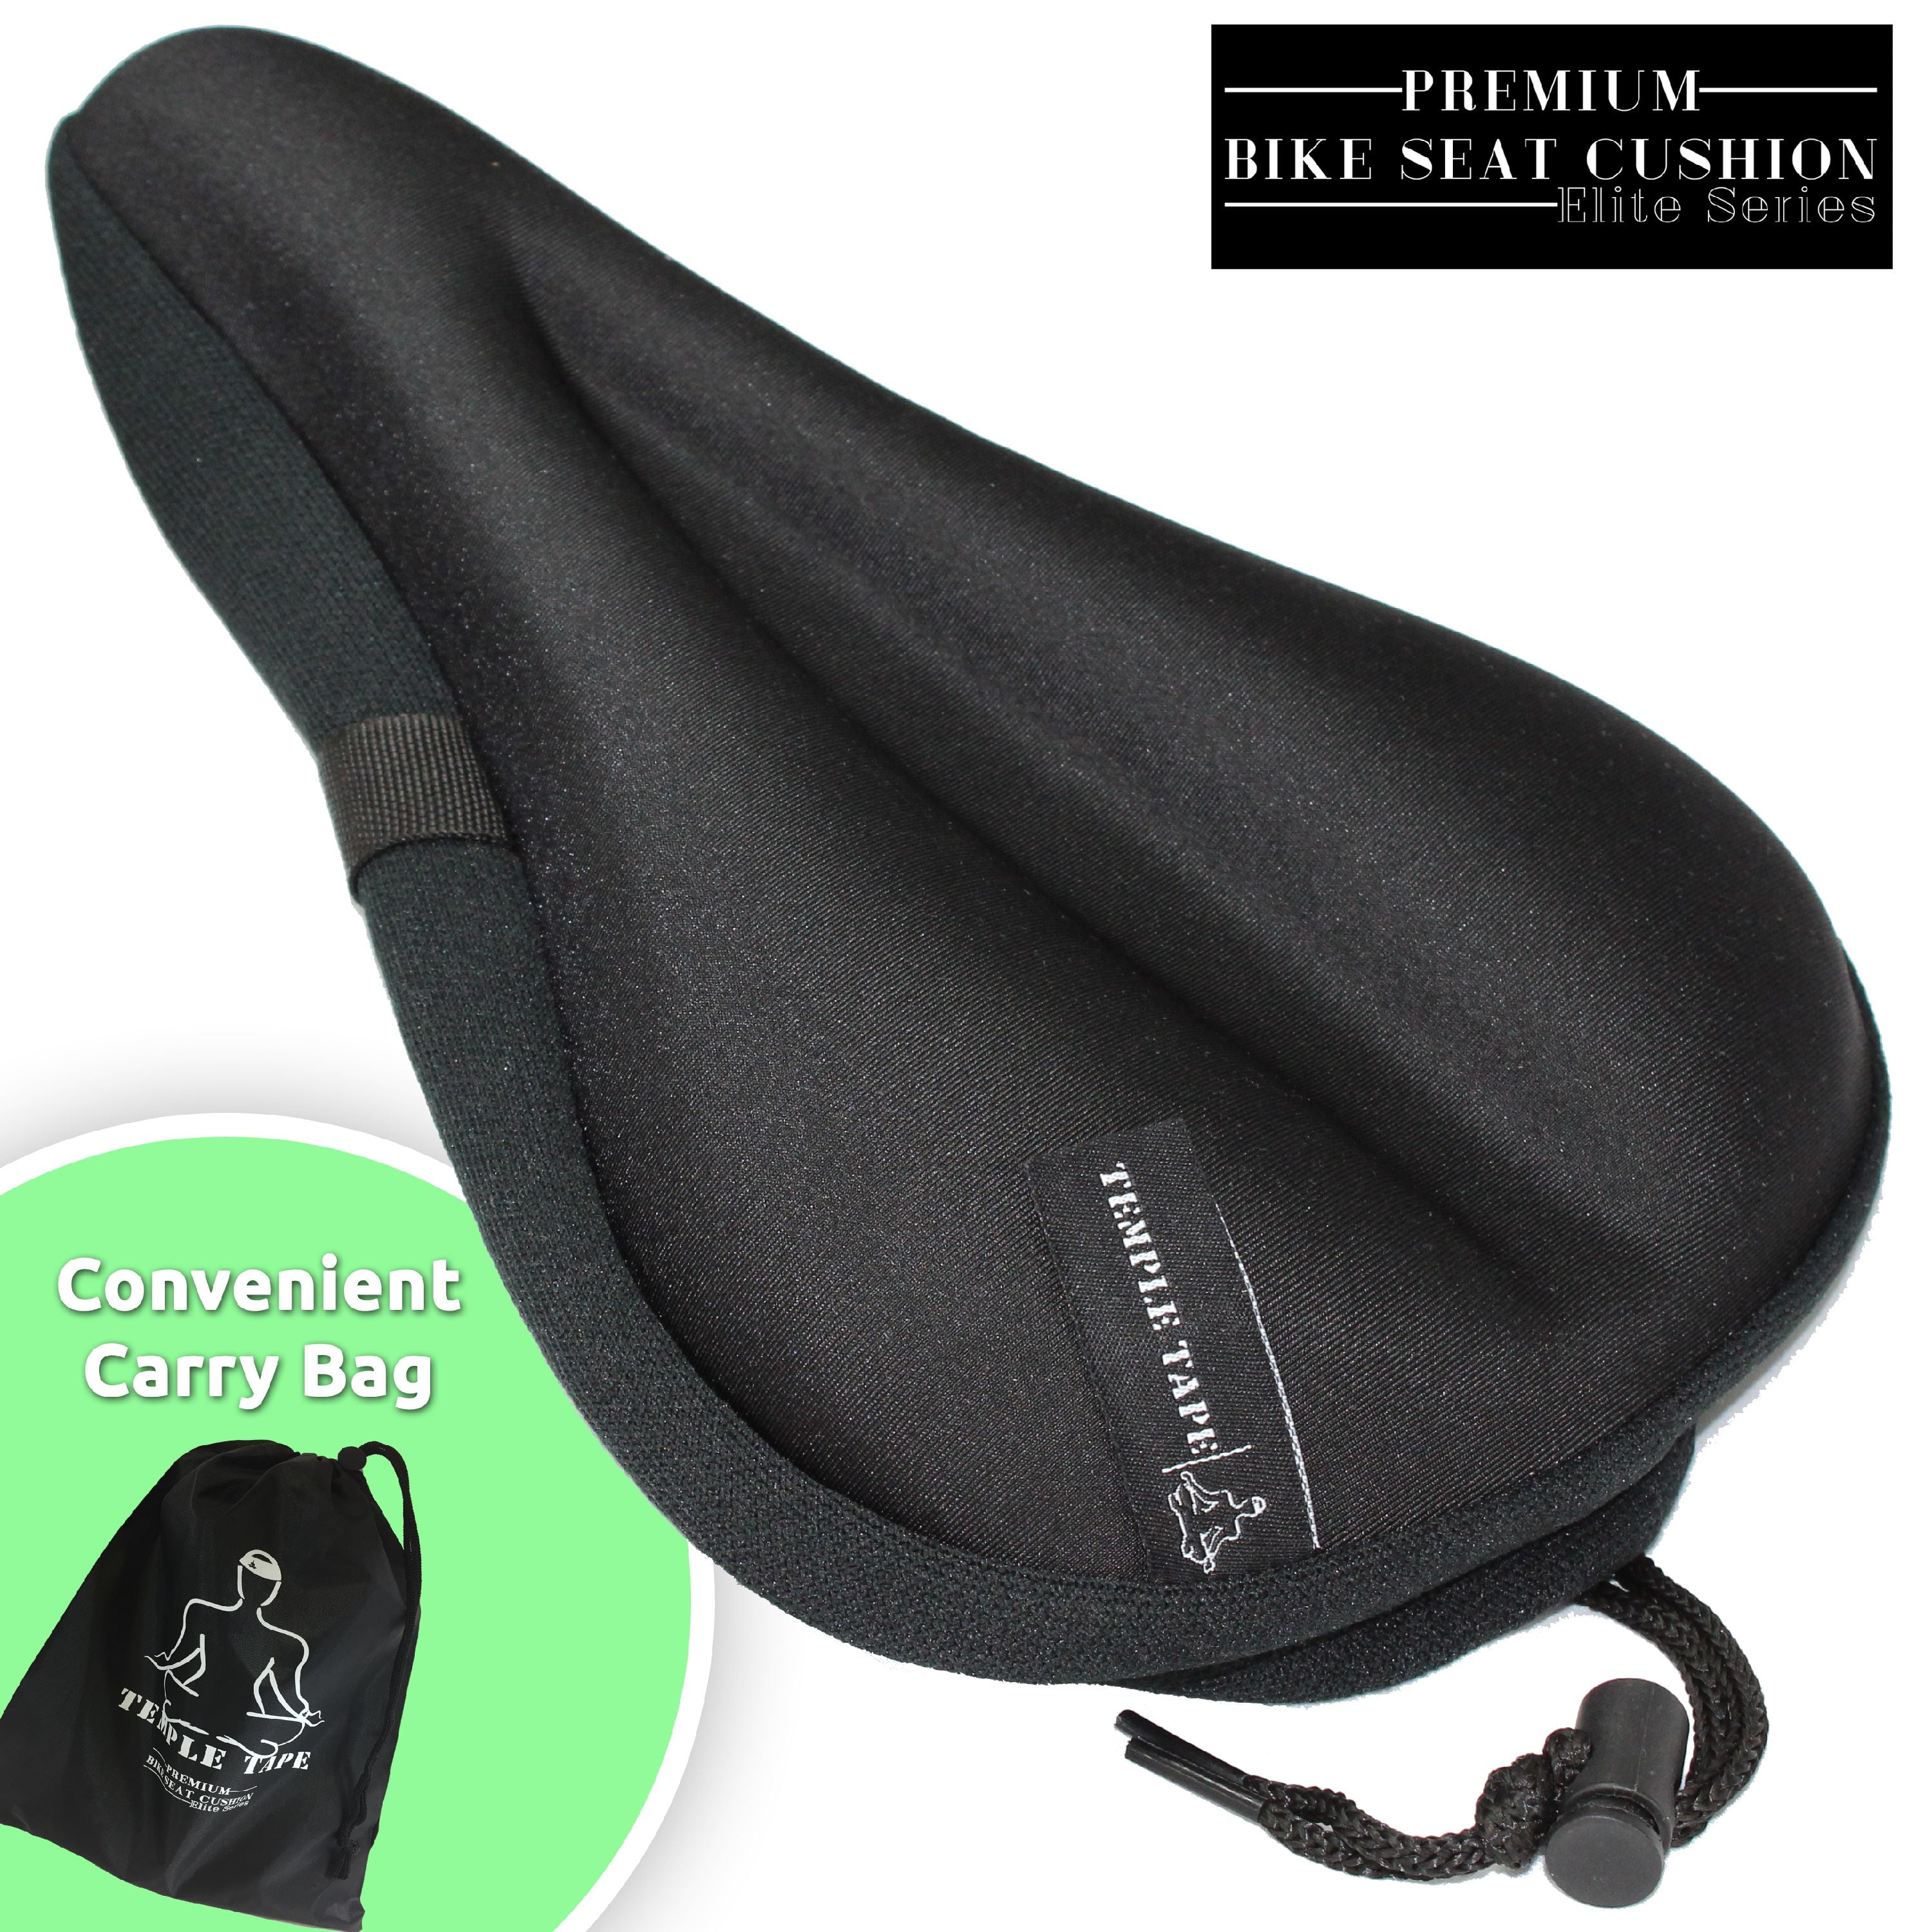 Reusable Bicycle Cushion Cover Bike Cushion Cover New Dustproof Bicycle Seat BT